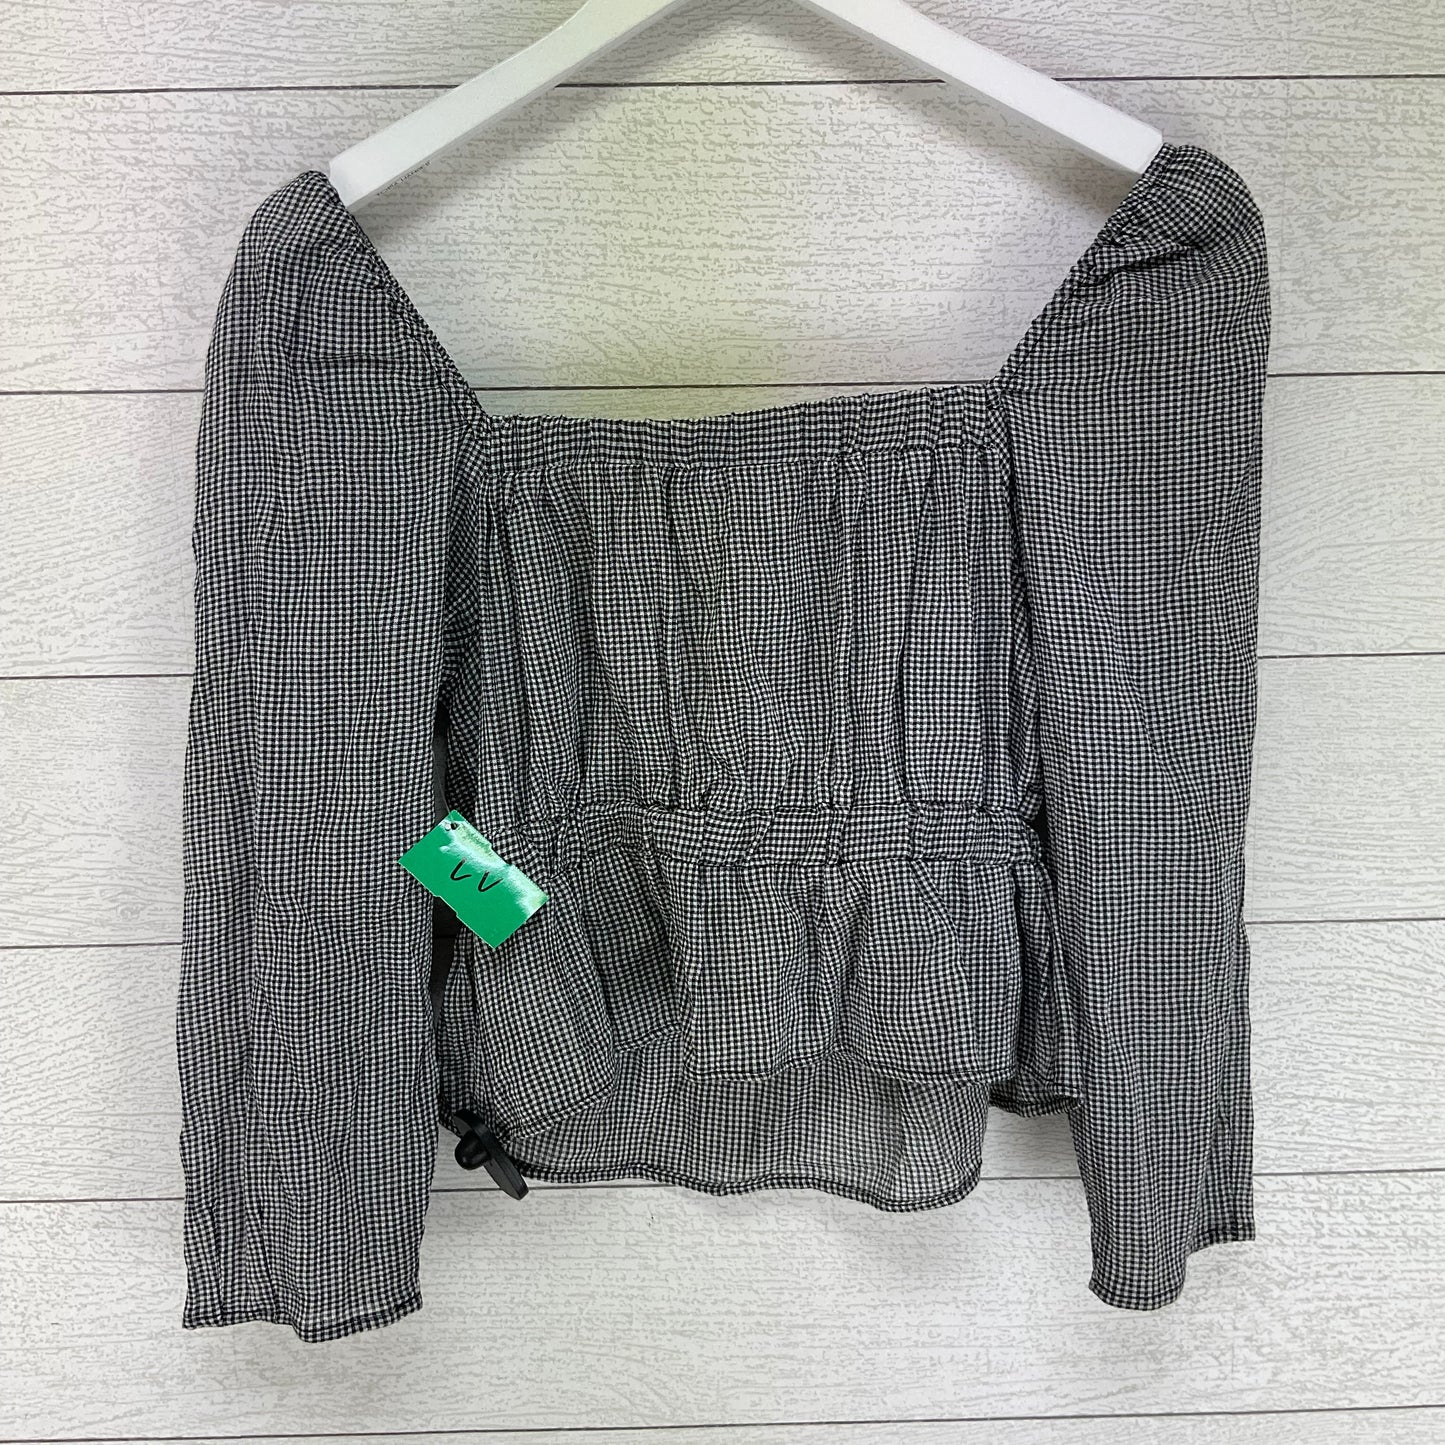 Top Long Sleeve By 7 For All Mankind  Size: Xs